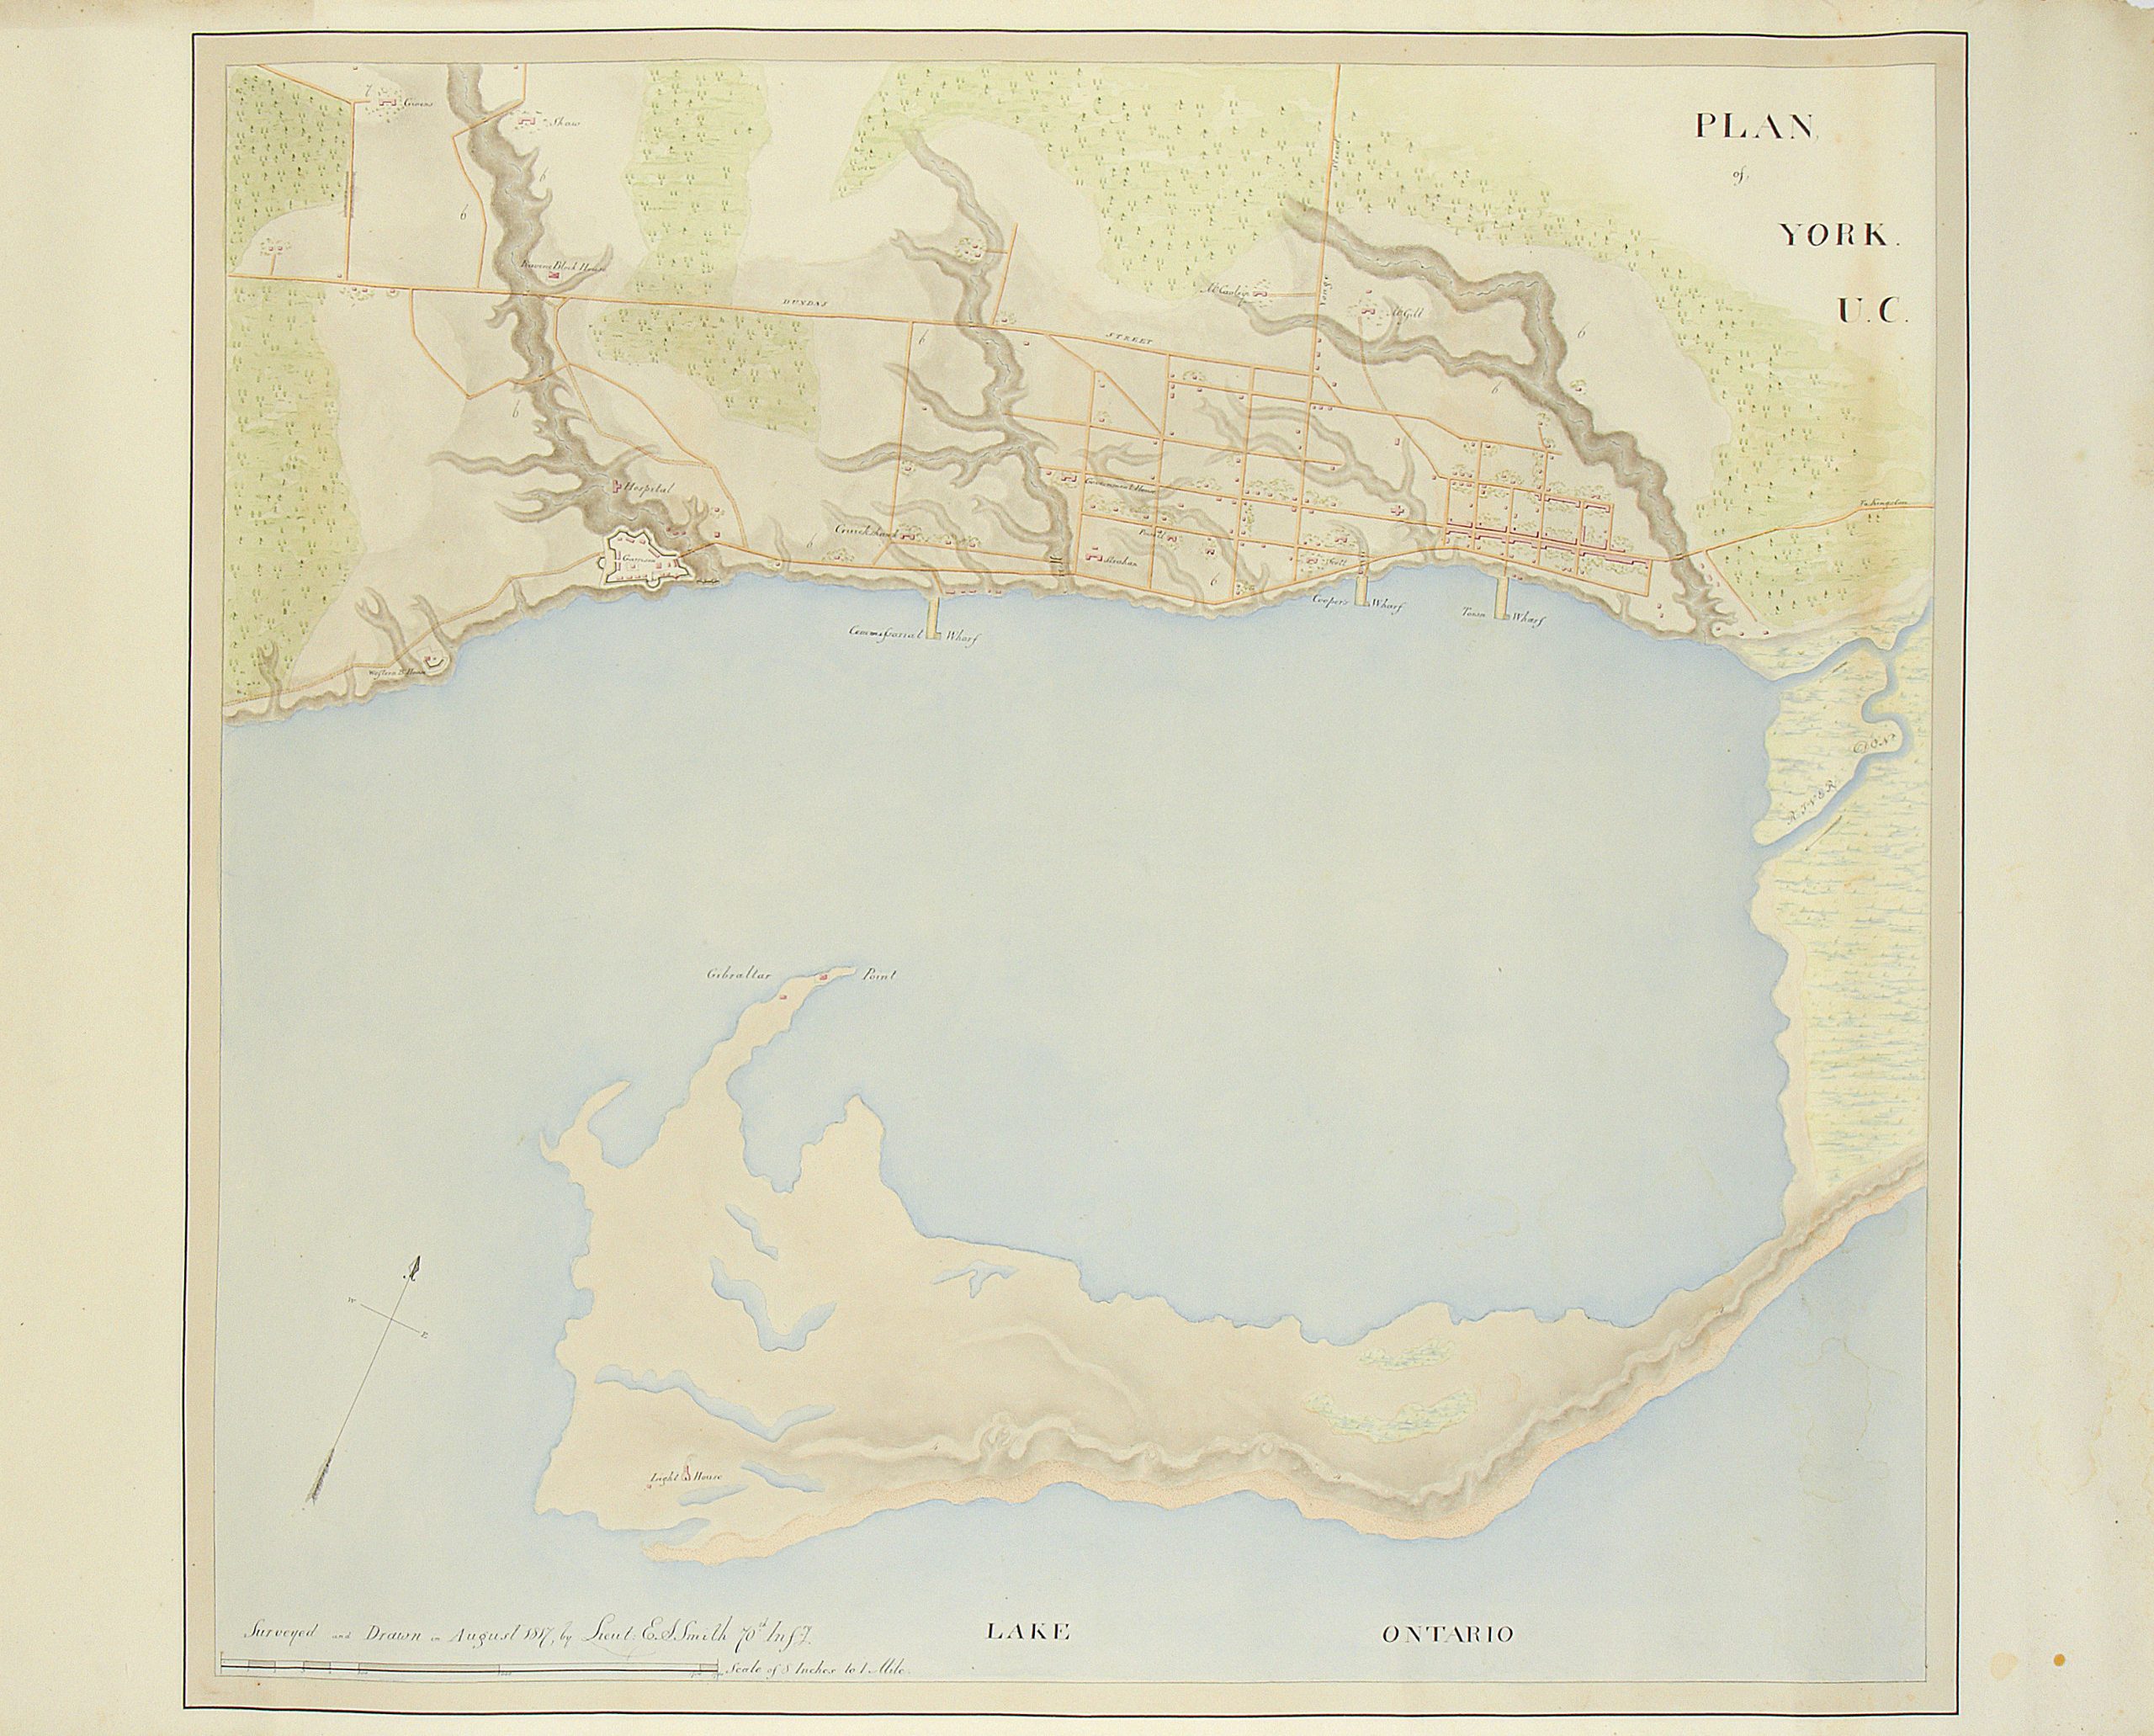 The 1817 Smith Plan of the Town of York. Note the location of Gibraltar Point, which was the name originally given to what we call Hanlan